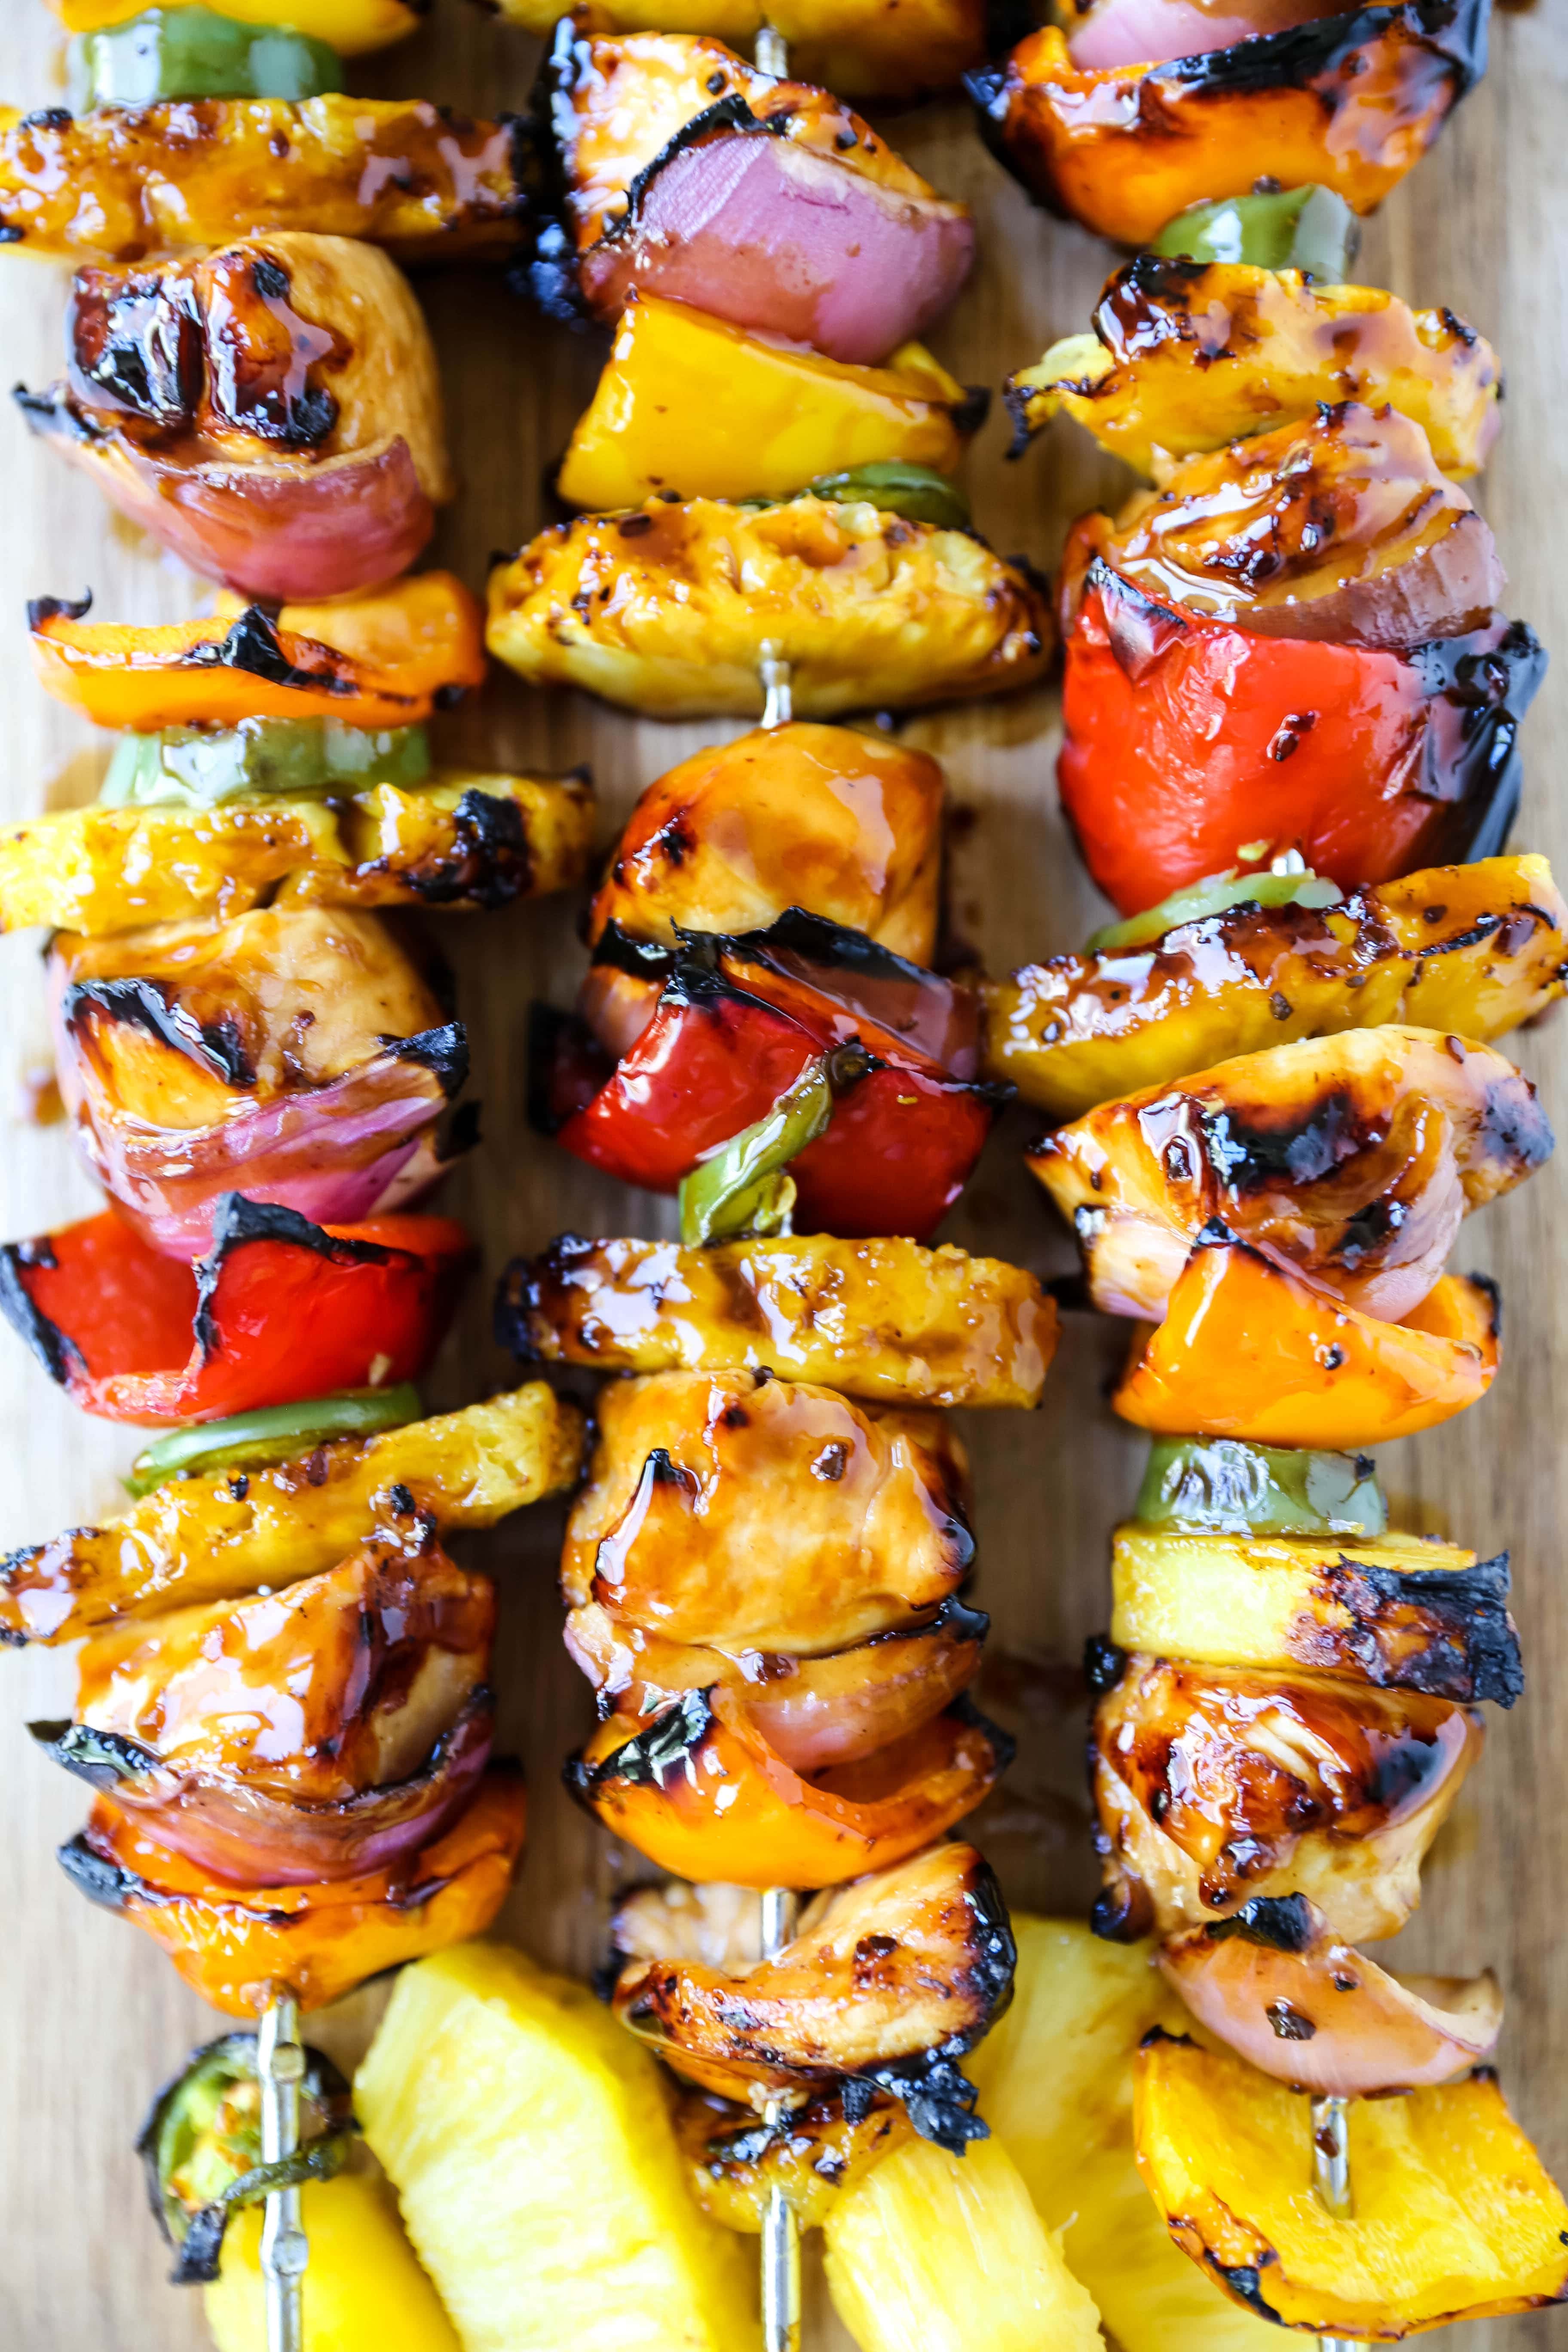 40 skewer recipes for a lazy weekend barbecue